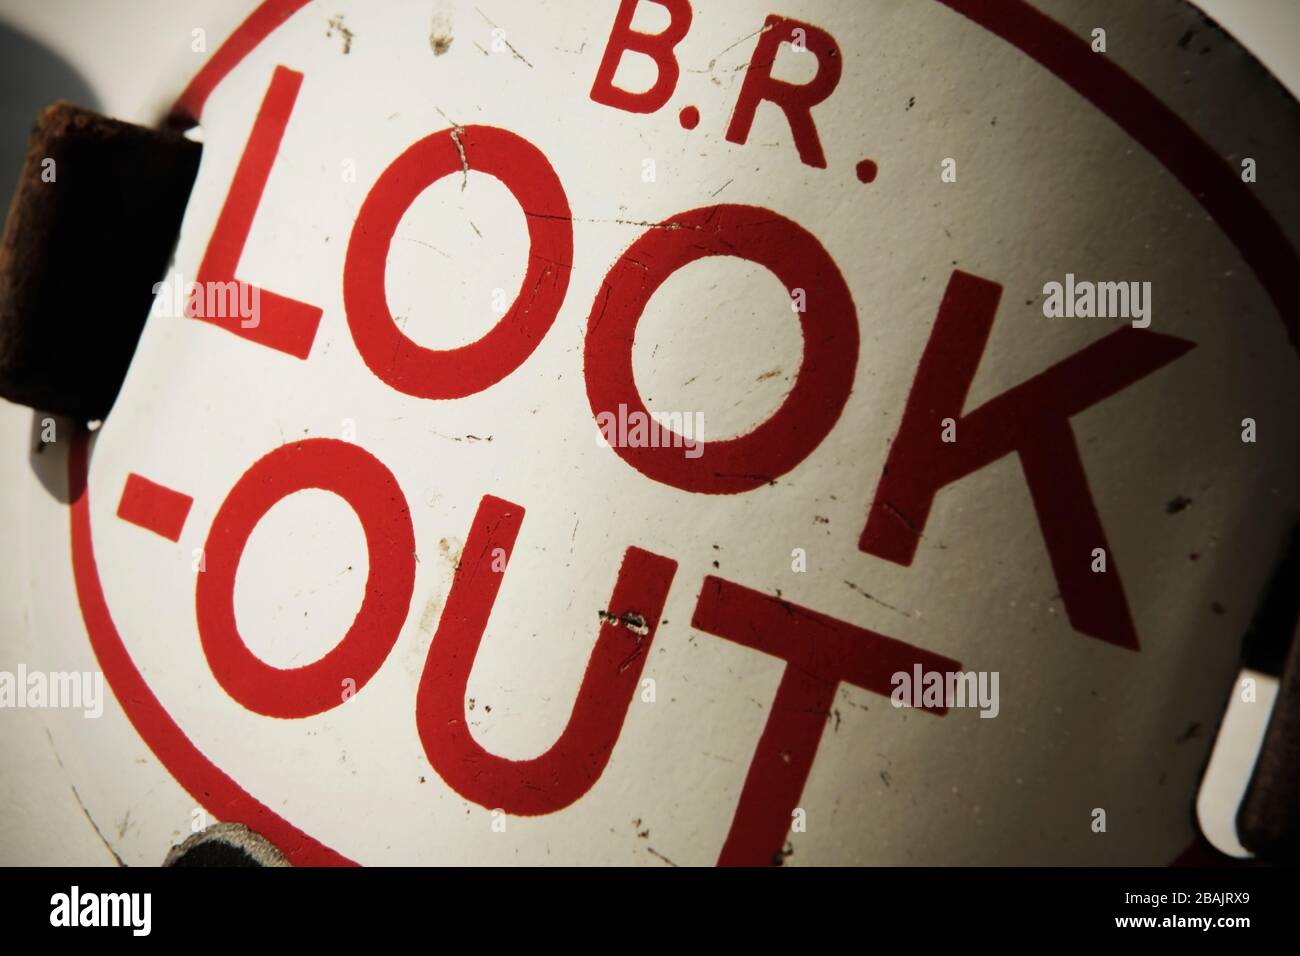 Vintage British Rail 'Look Out' armband. Stock Photo